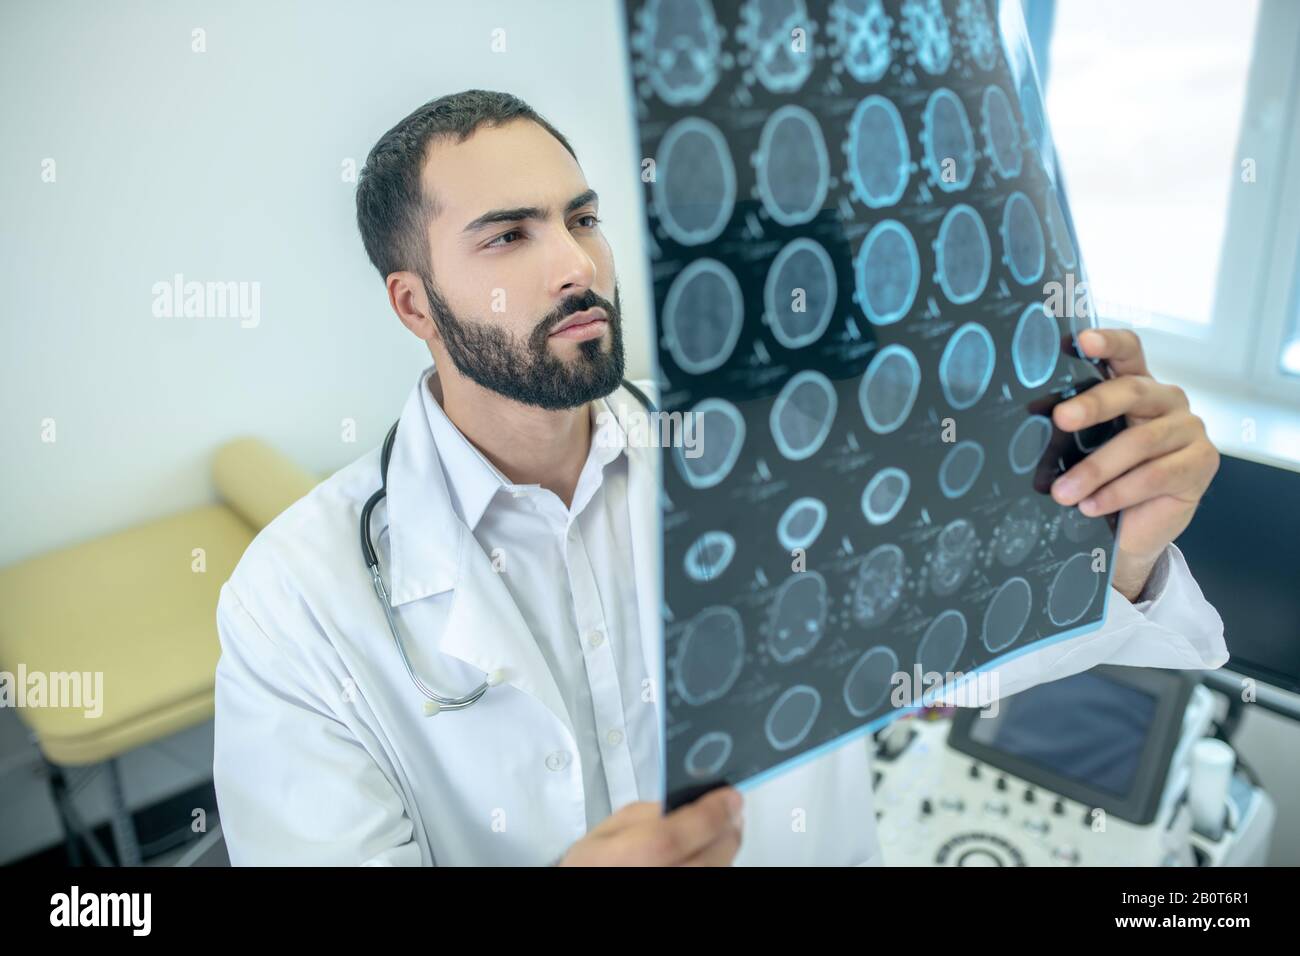 Male bearded doctor in a white robe analyzing MRI results Stock Photo